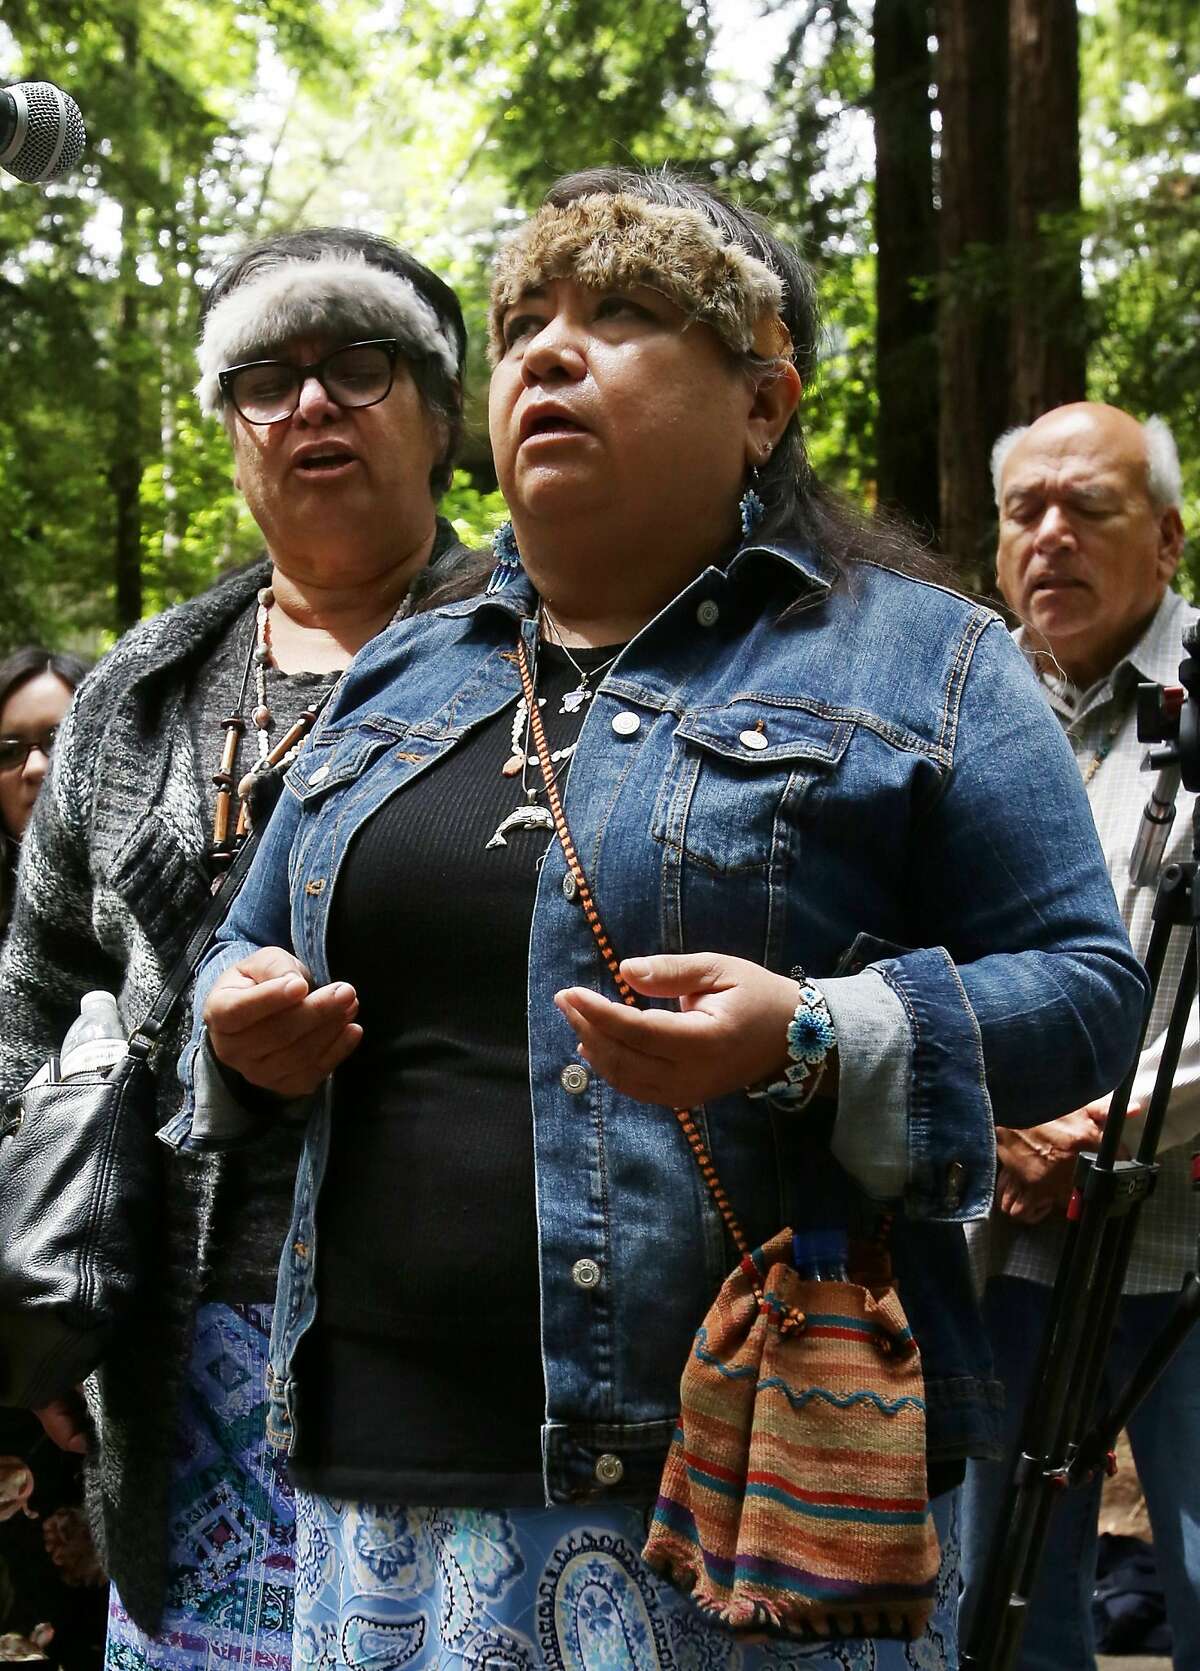 Representatives of the Amah Mutsun Tribal Band sing during the removal of the El Camino Real bell marker on Friday, 6/21, 2019 at UC Santa Cruz in Santa Cruz, California. From left are: Lorraine Luna, Catherine Luna and Valentin Lopez. The bell marker, which memorializes the California Missions and an imagined route of travel that once connected them, is viewed by the Amah Mutsun and many other California indigenous people as a racist symbol that glorifies the domination and dehumanization of their ancestors. It is being removed at the request of the Amah Mutsun, with support from UCSC faculty members, students, and administrators.